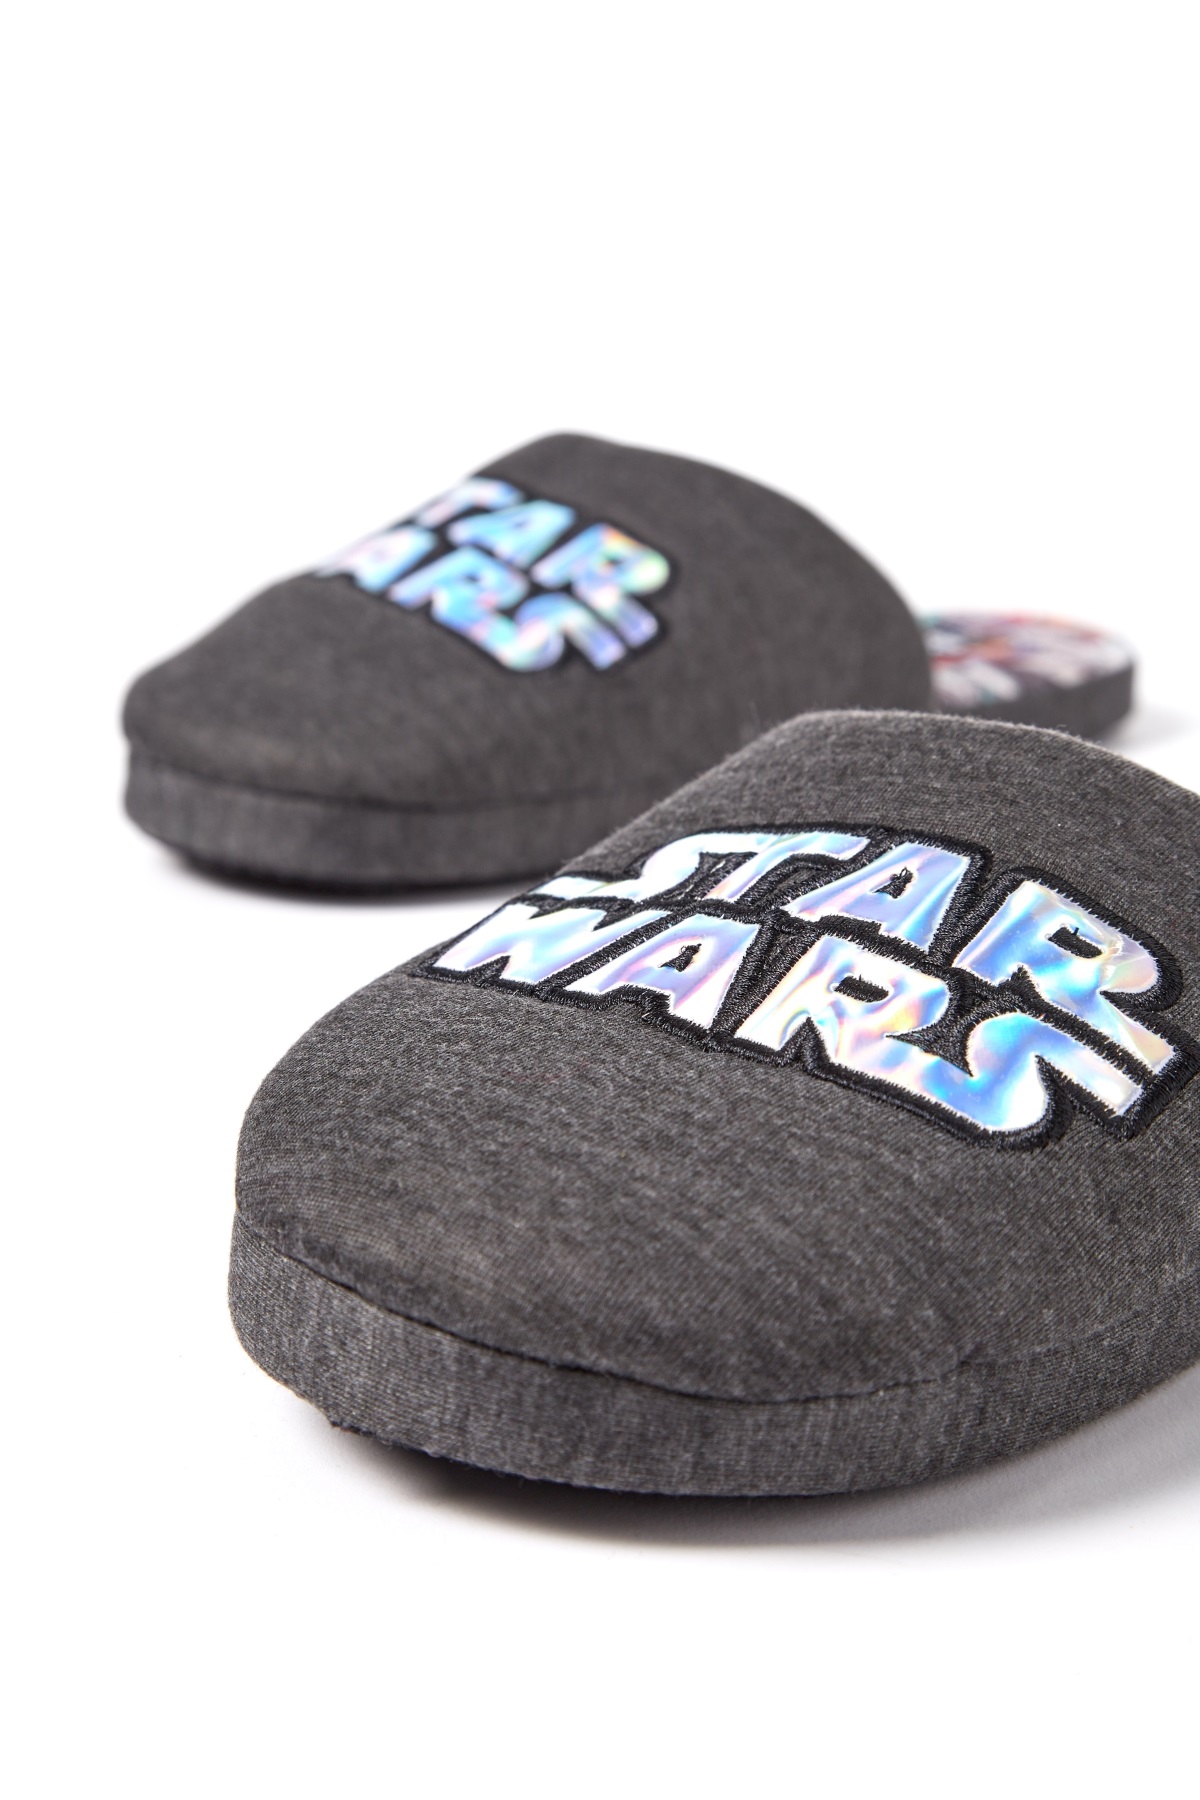 Star Wars Slippers at Cotton On NZ